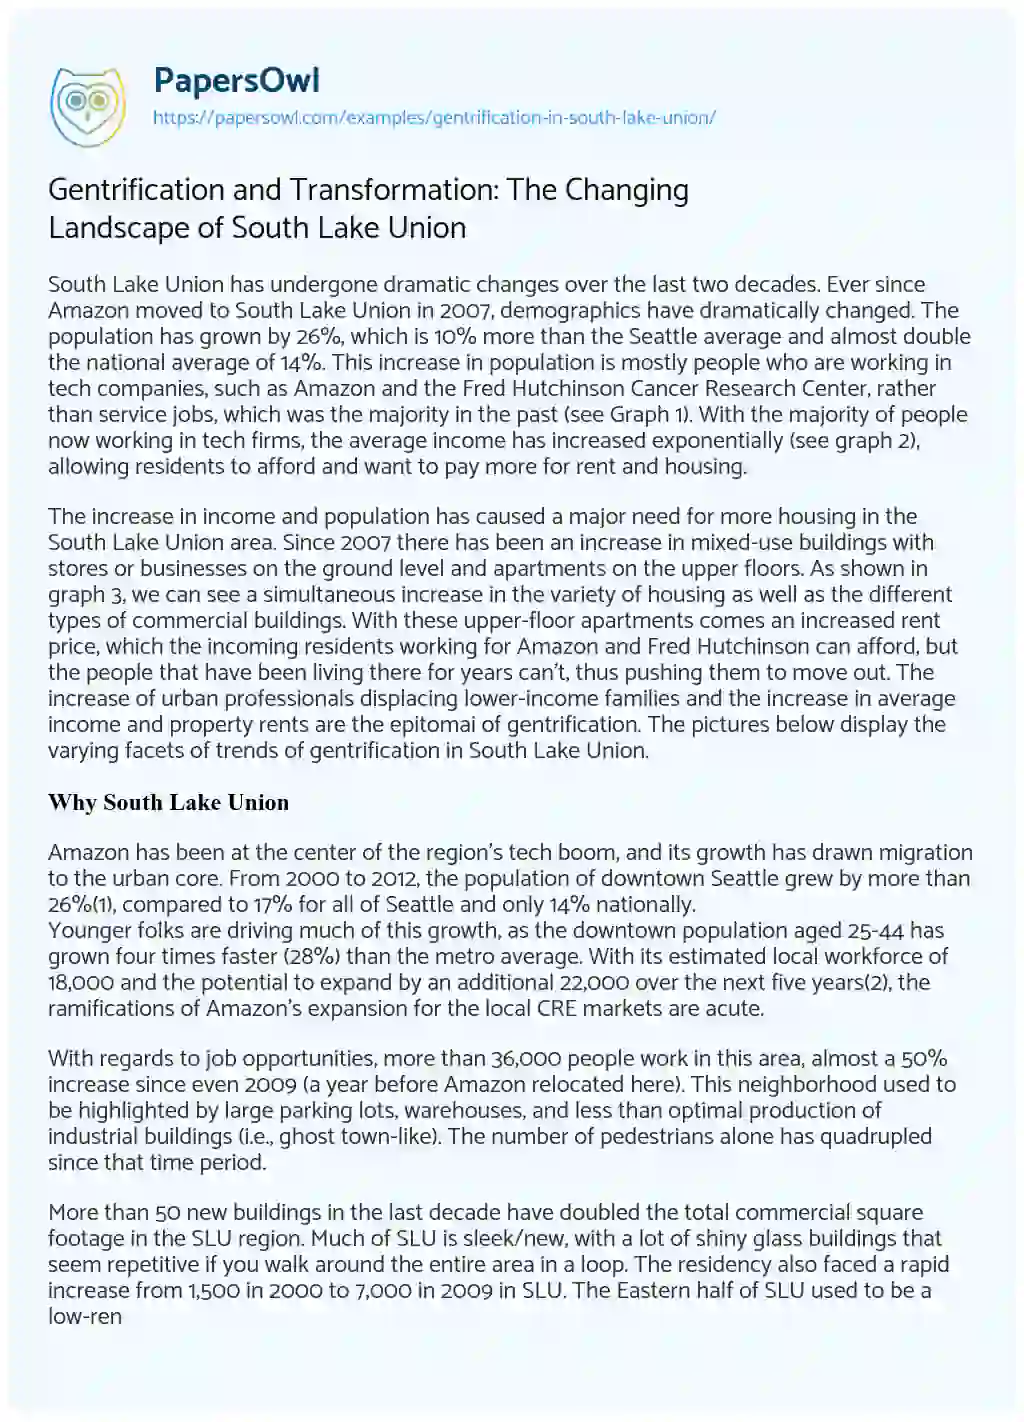 Essay on Gentrification and Transformation: the Changing Landscape of South Lake Union